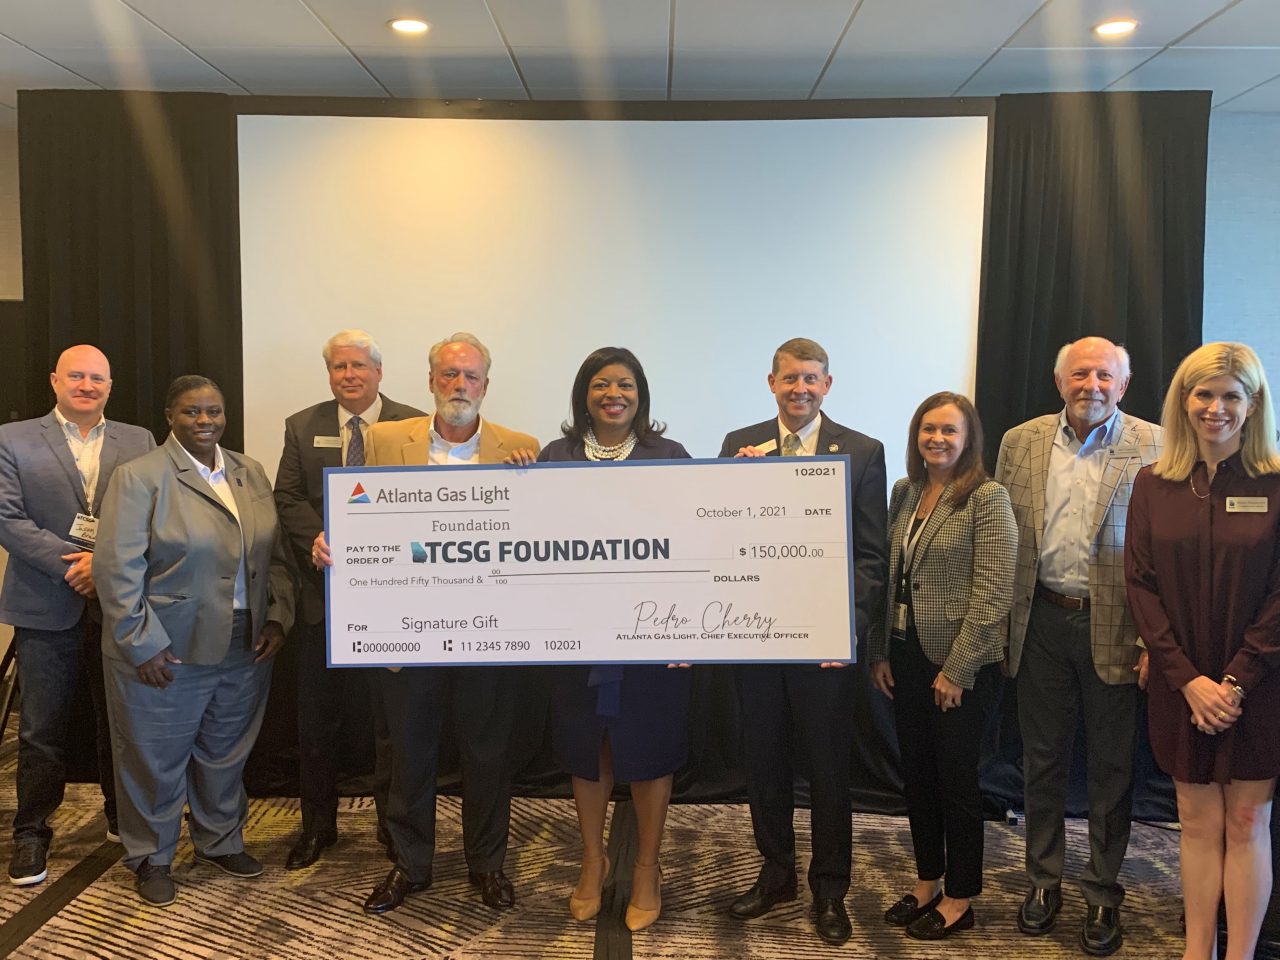 Atlanta Gas Light Foundation invests in workforce training at Technical College System of Georgia